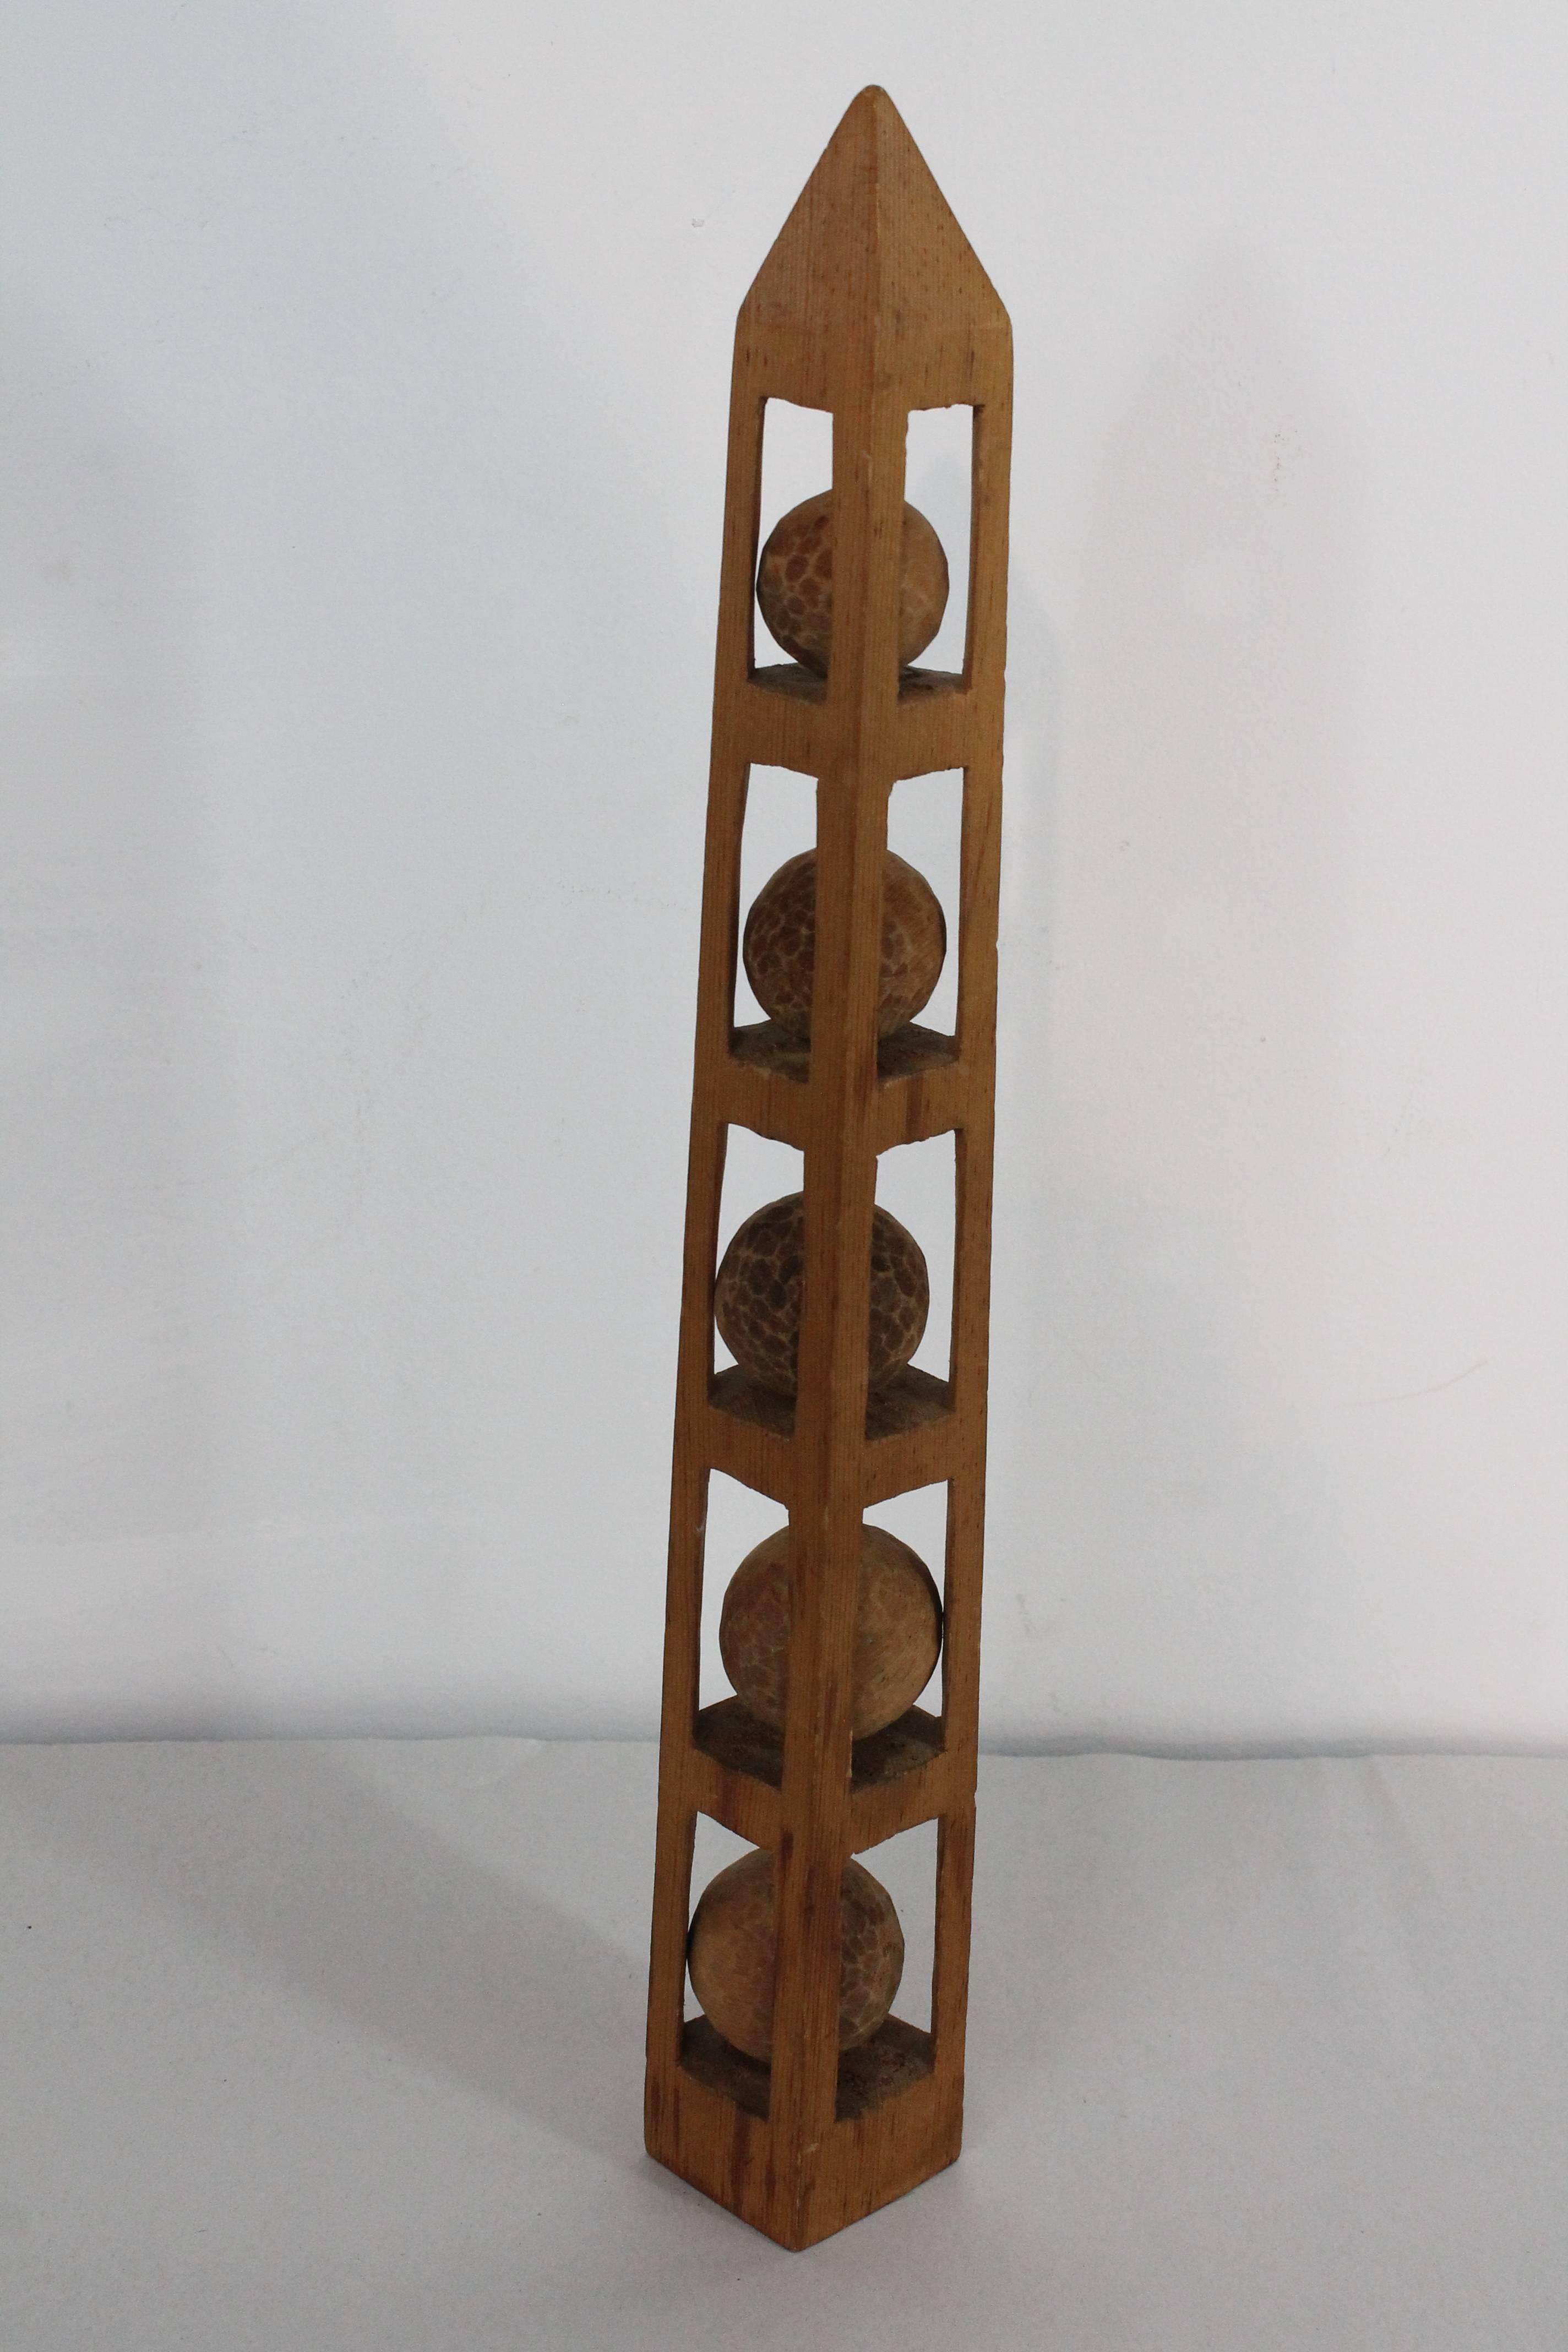 Folk art carved obelisk with 5 balls carved within the form. 
This whimsy shows the carvers skill by the balls being carved within the structure of obelisk form.